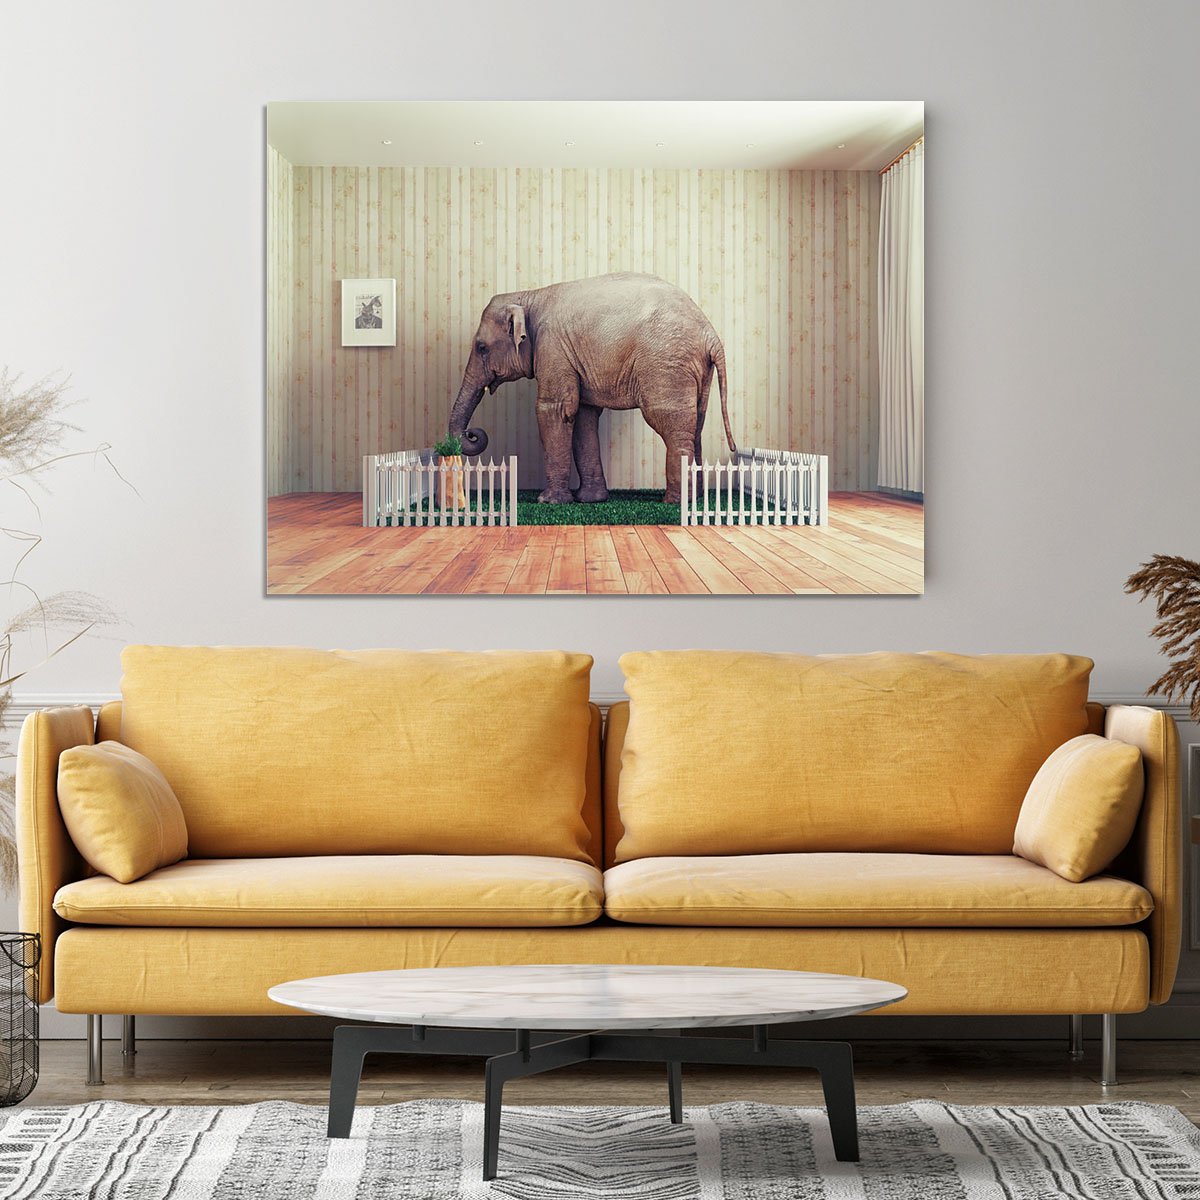 An Elephant calf as the pet Canvas Print or Poster